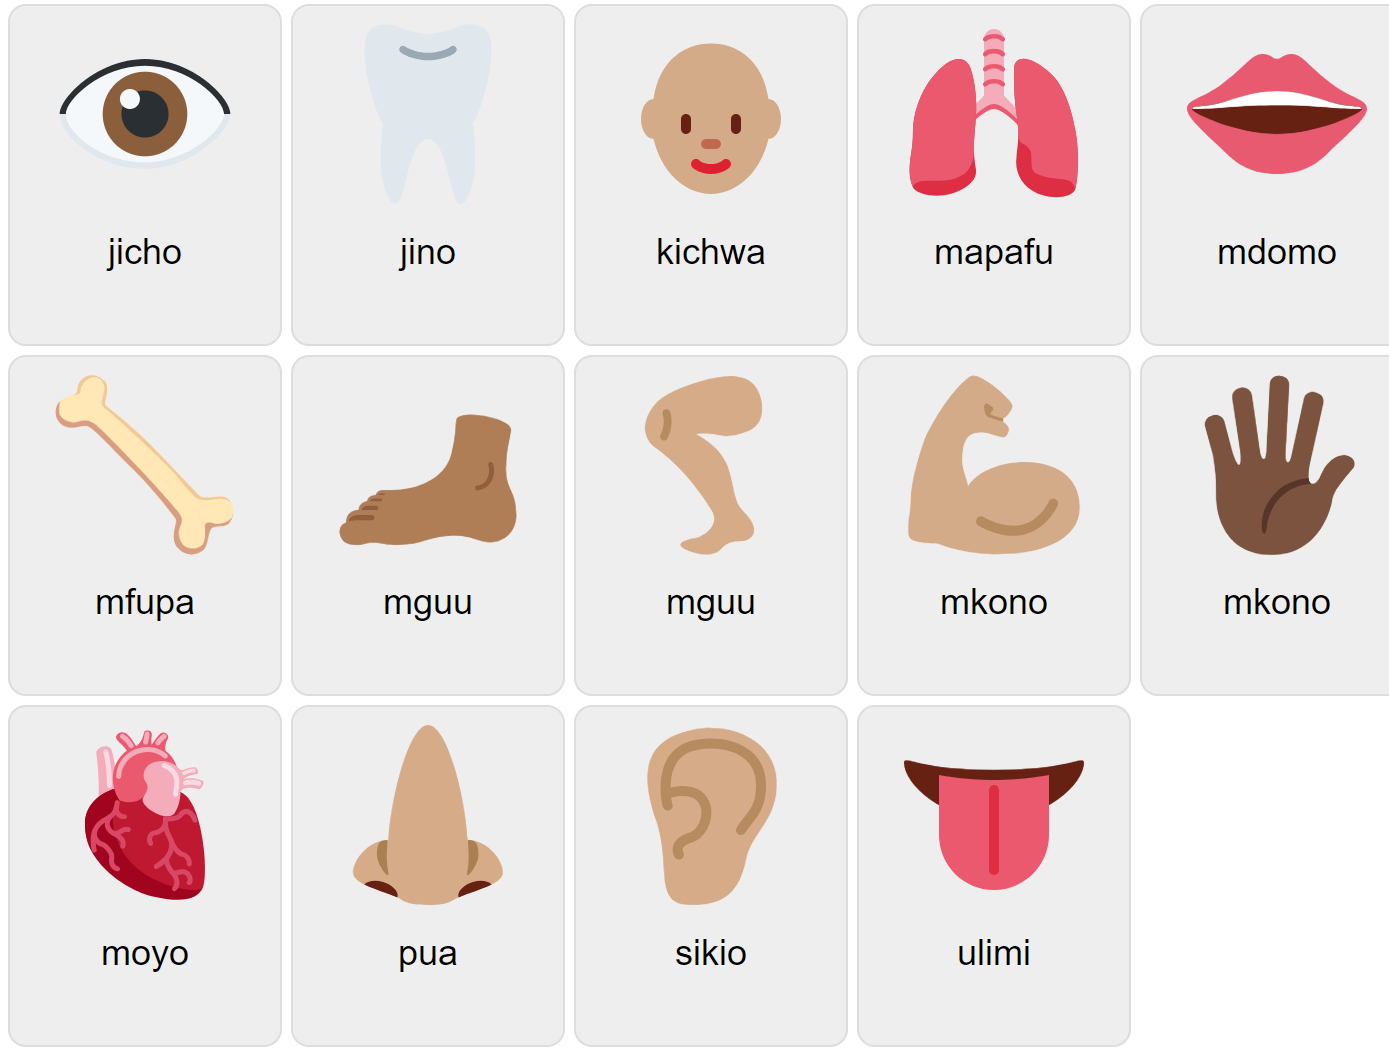 Body Parts in Swahili